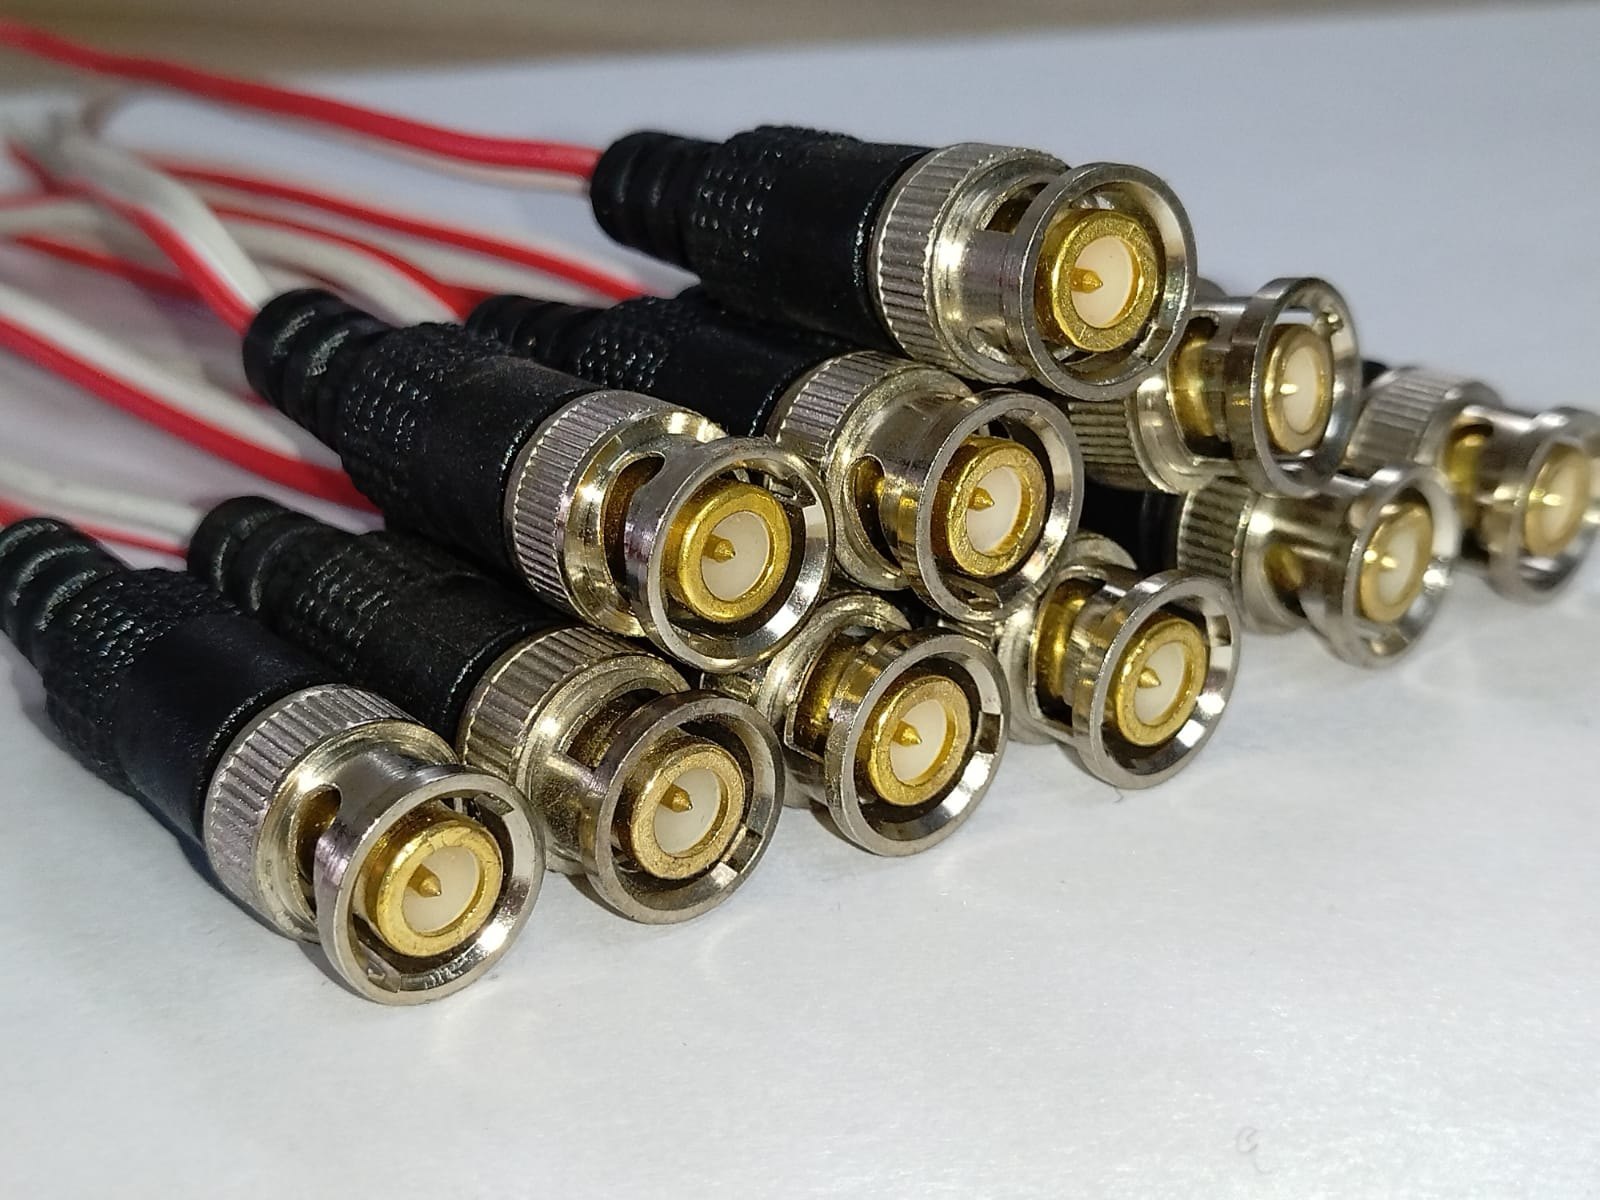 Understanding The Applications And Uses Of A BNC Connector